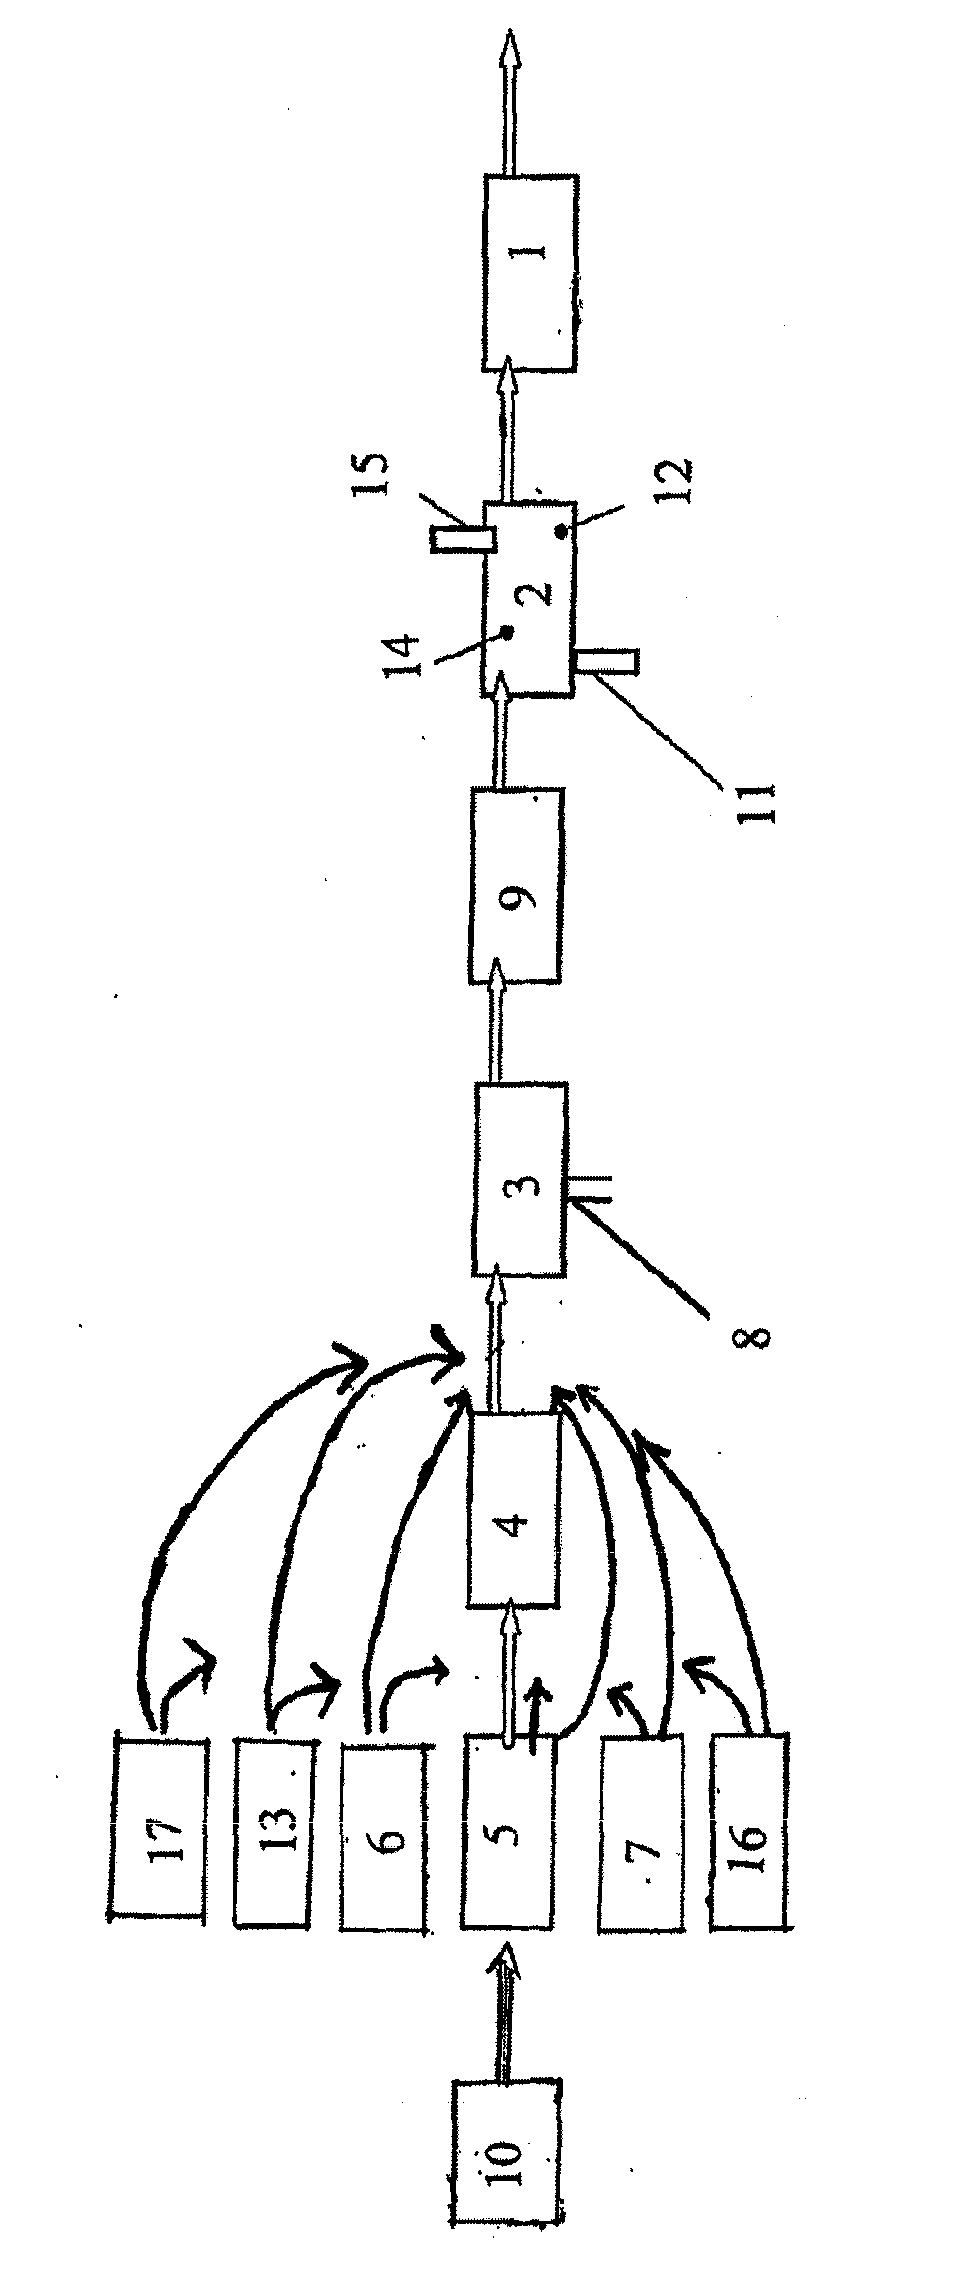 Method, device and use of a device for producing fuel from moist biomass